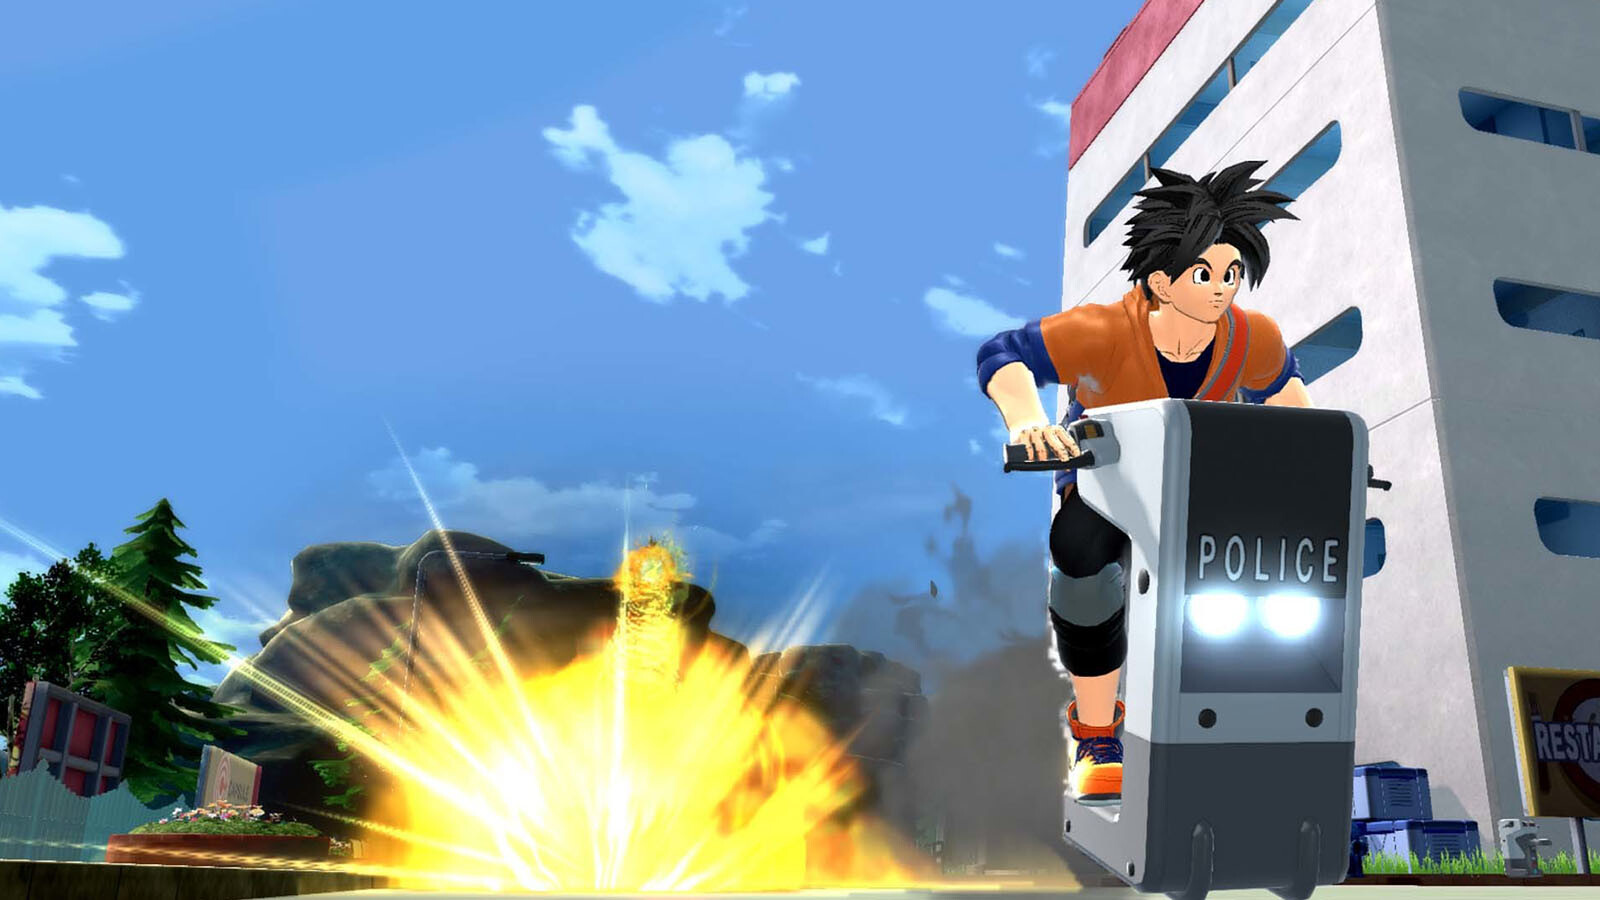 DRAGON BALL: THE BREAKERS Steam Key for PC - Buy now